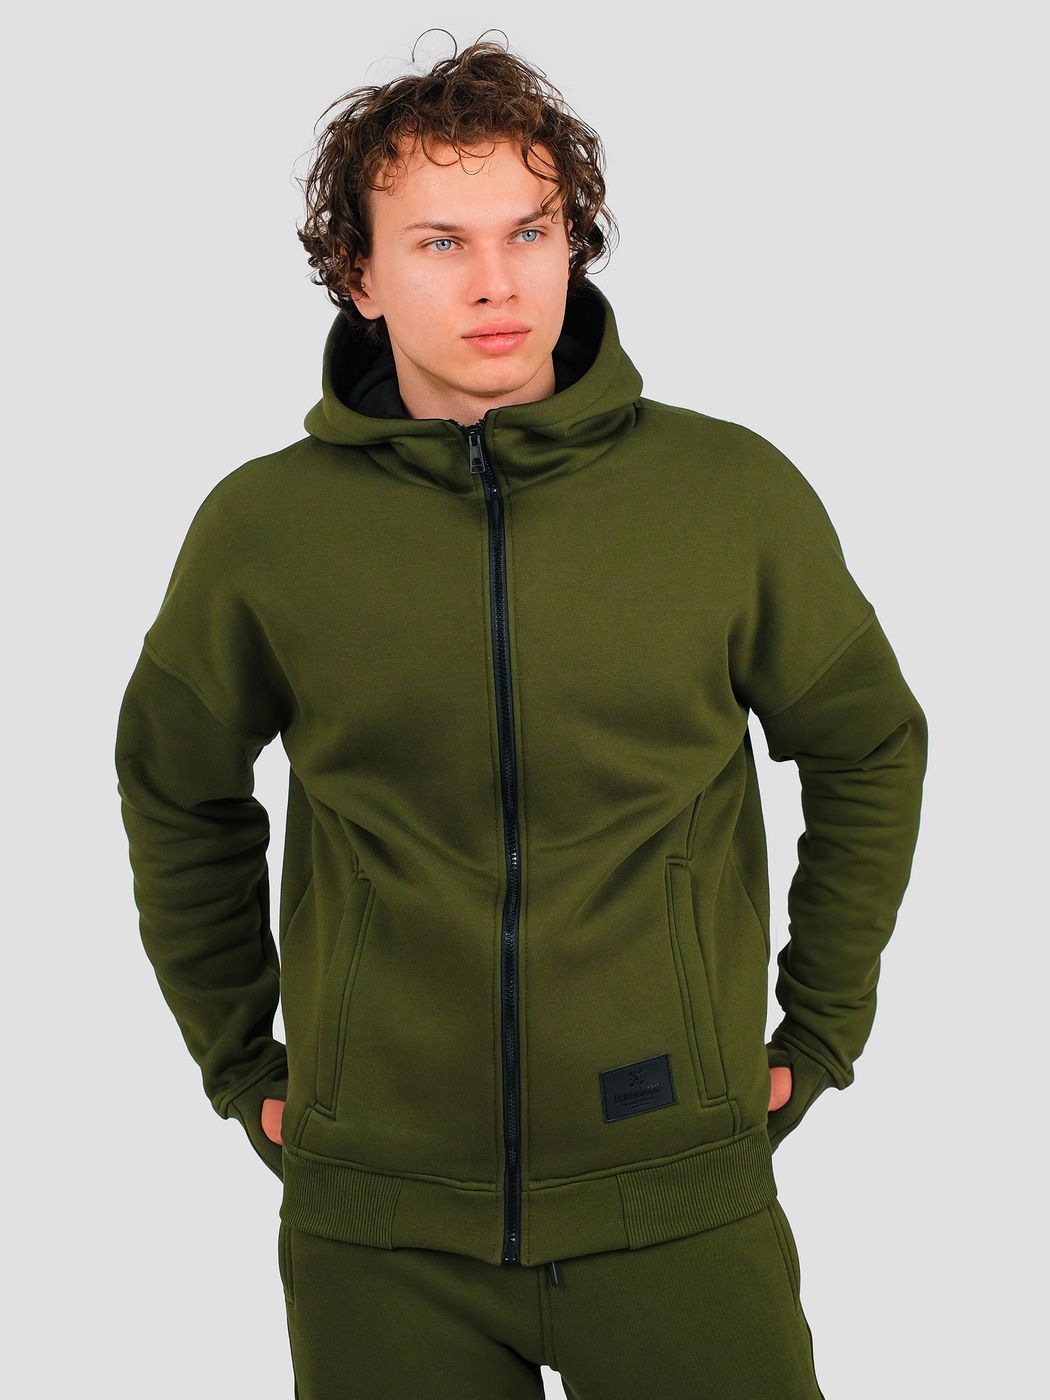 Men's tracksuit set Hoodie with a zipper and Pants Green, Green, M-L, L (108 cm)